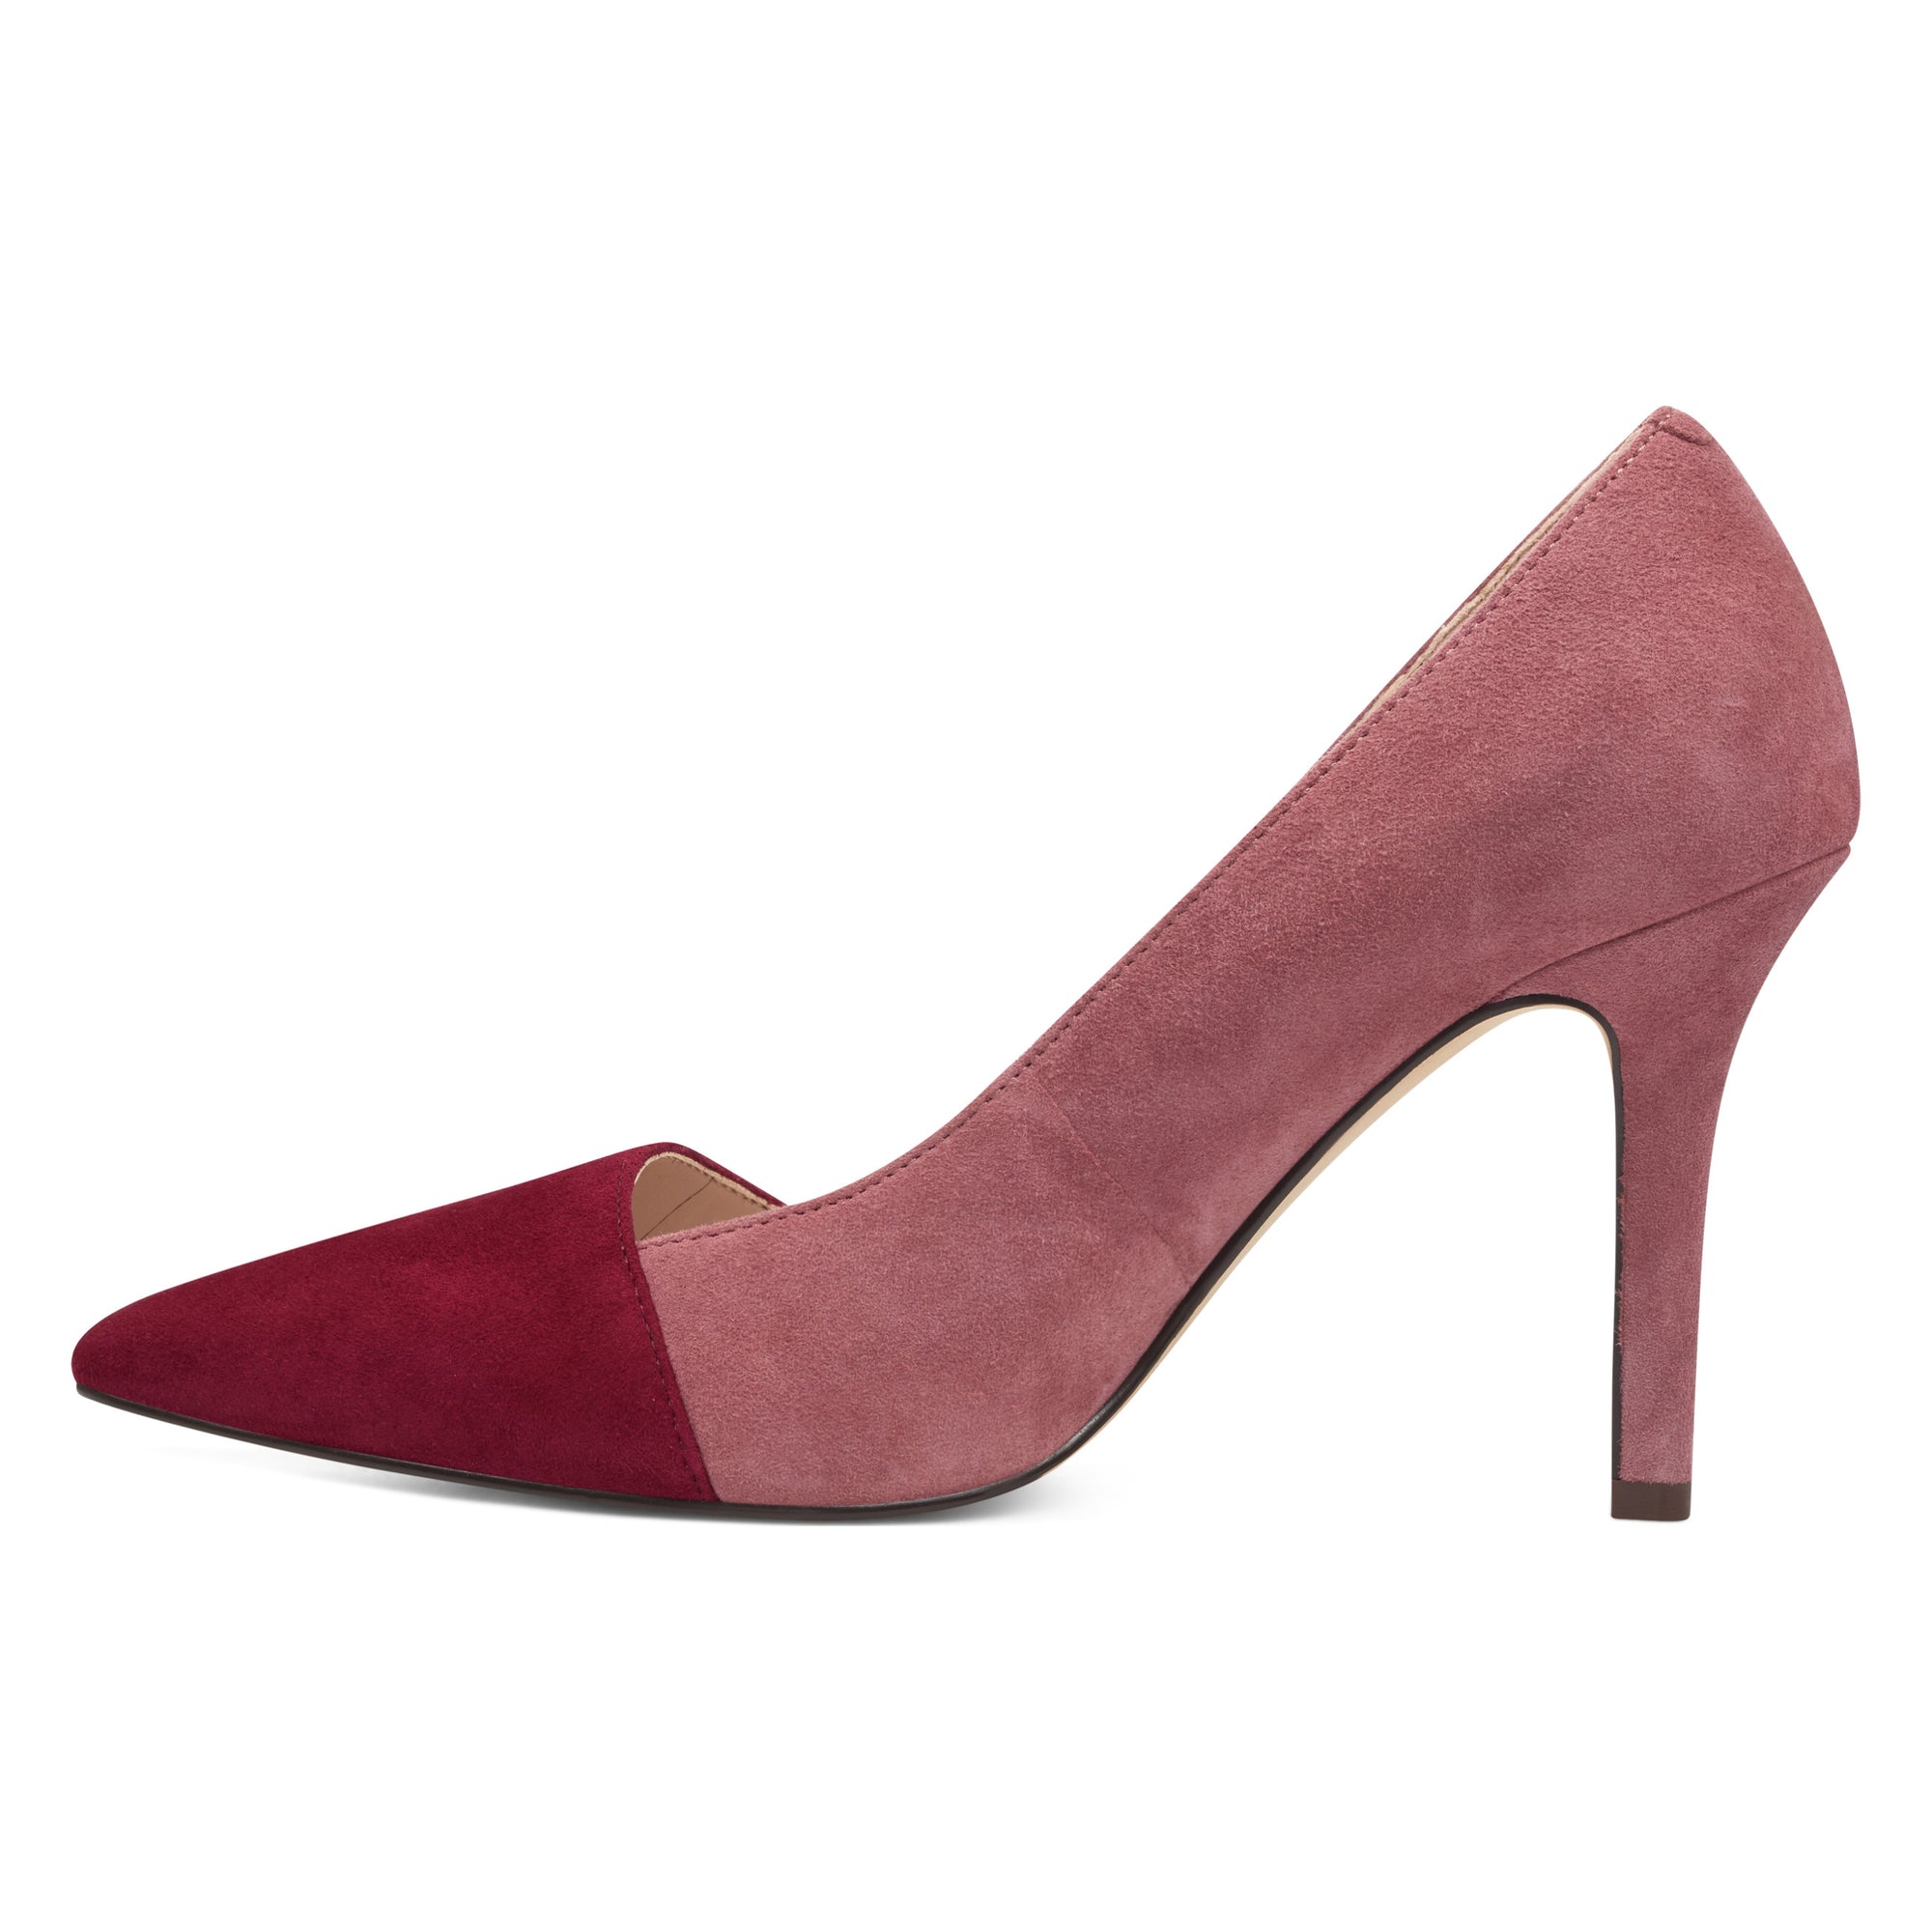 Manque Pointy Toe Pumps - Nine West